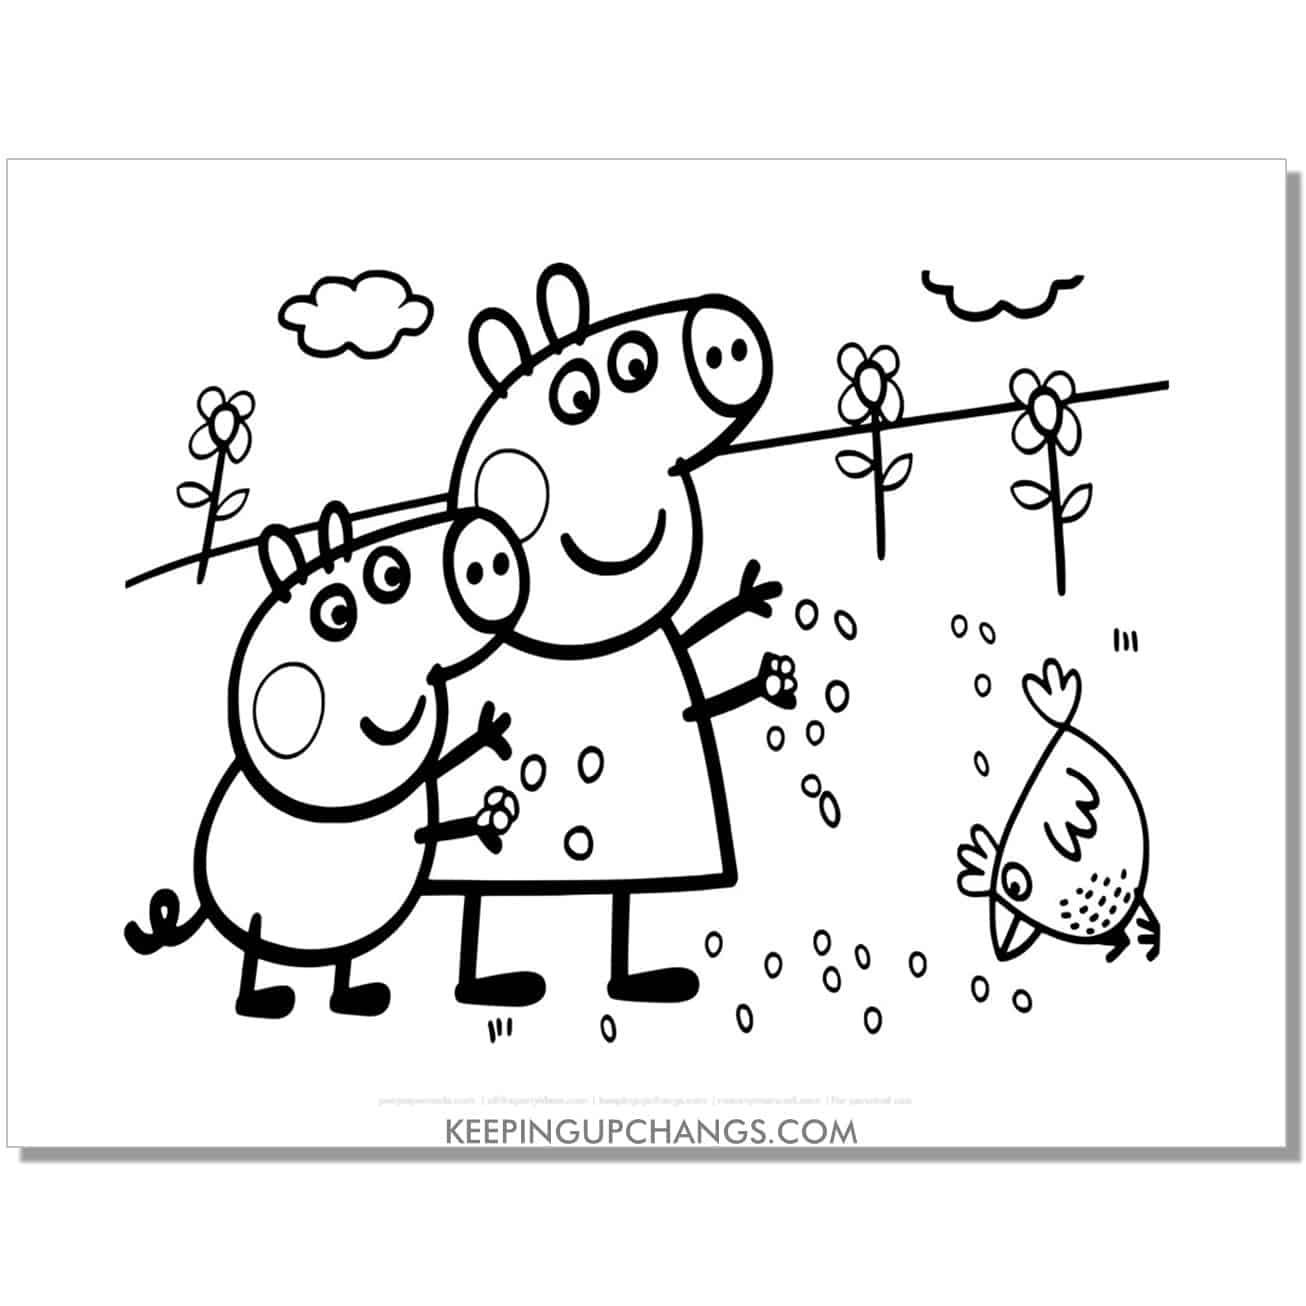 free george and peppa pig feeding chicken coloring page, sheet.